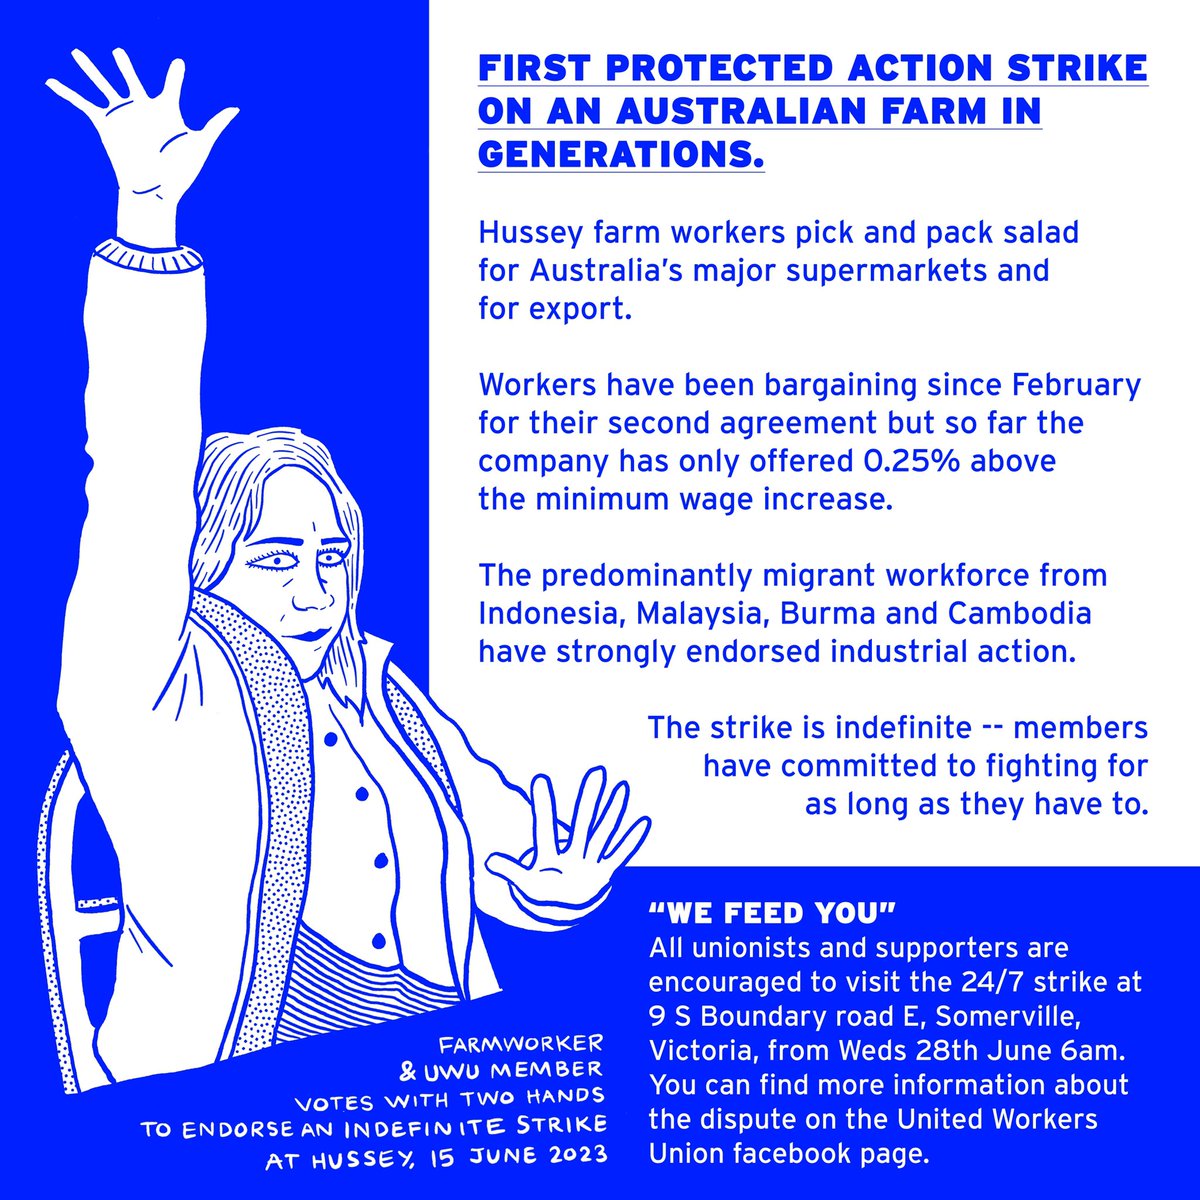 Pls come down to 9 S Boundary Rd E Somerville at 6am tomorrow Wednesday the 28th June to support and celebrate the first protected action strike on an australian farm in literally generations @UnitedWorkersOz @VicUnions 24/7 strike presence to follow, visitors welcome any time